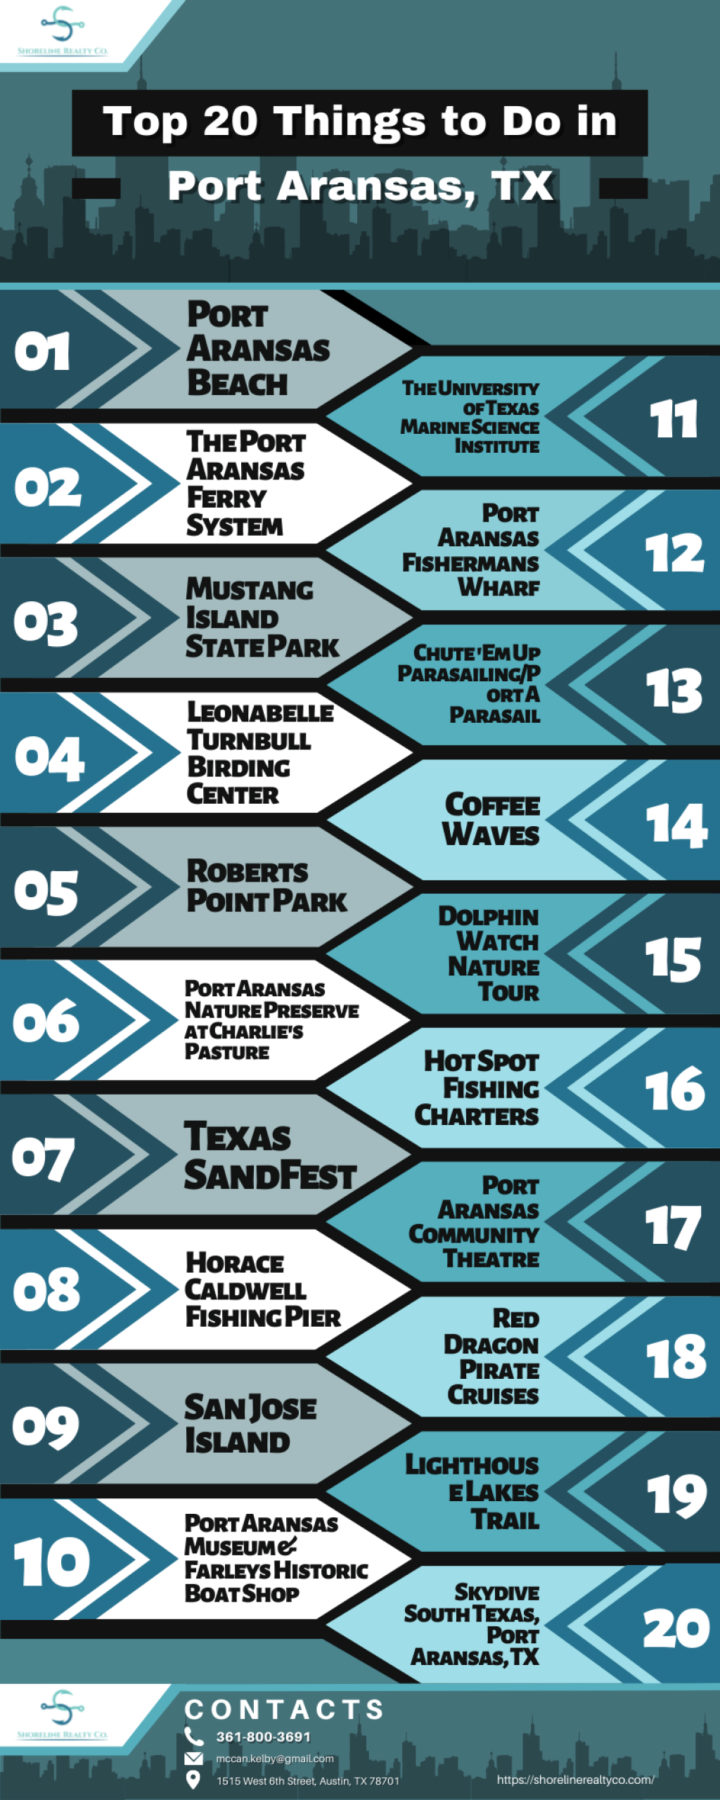 Top 20 Things to Do in Port Aransas, TX